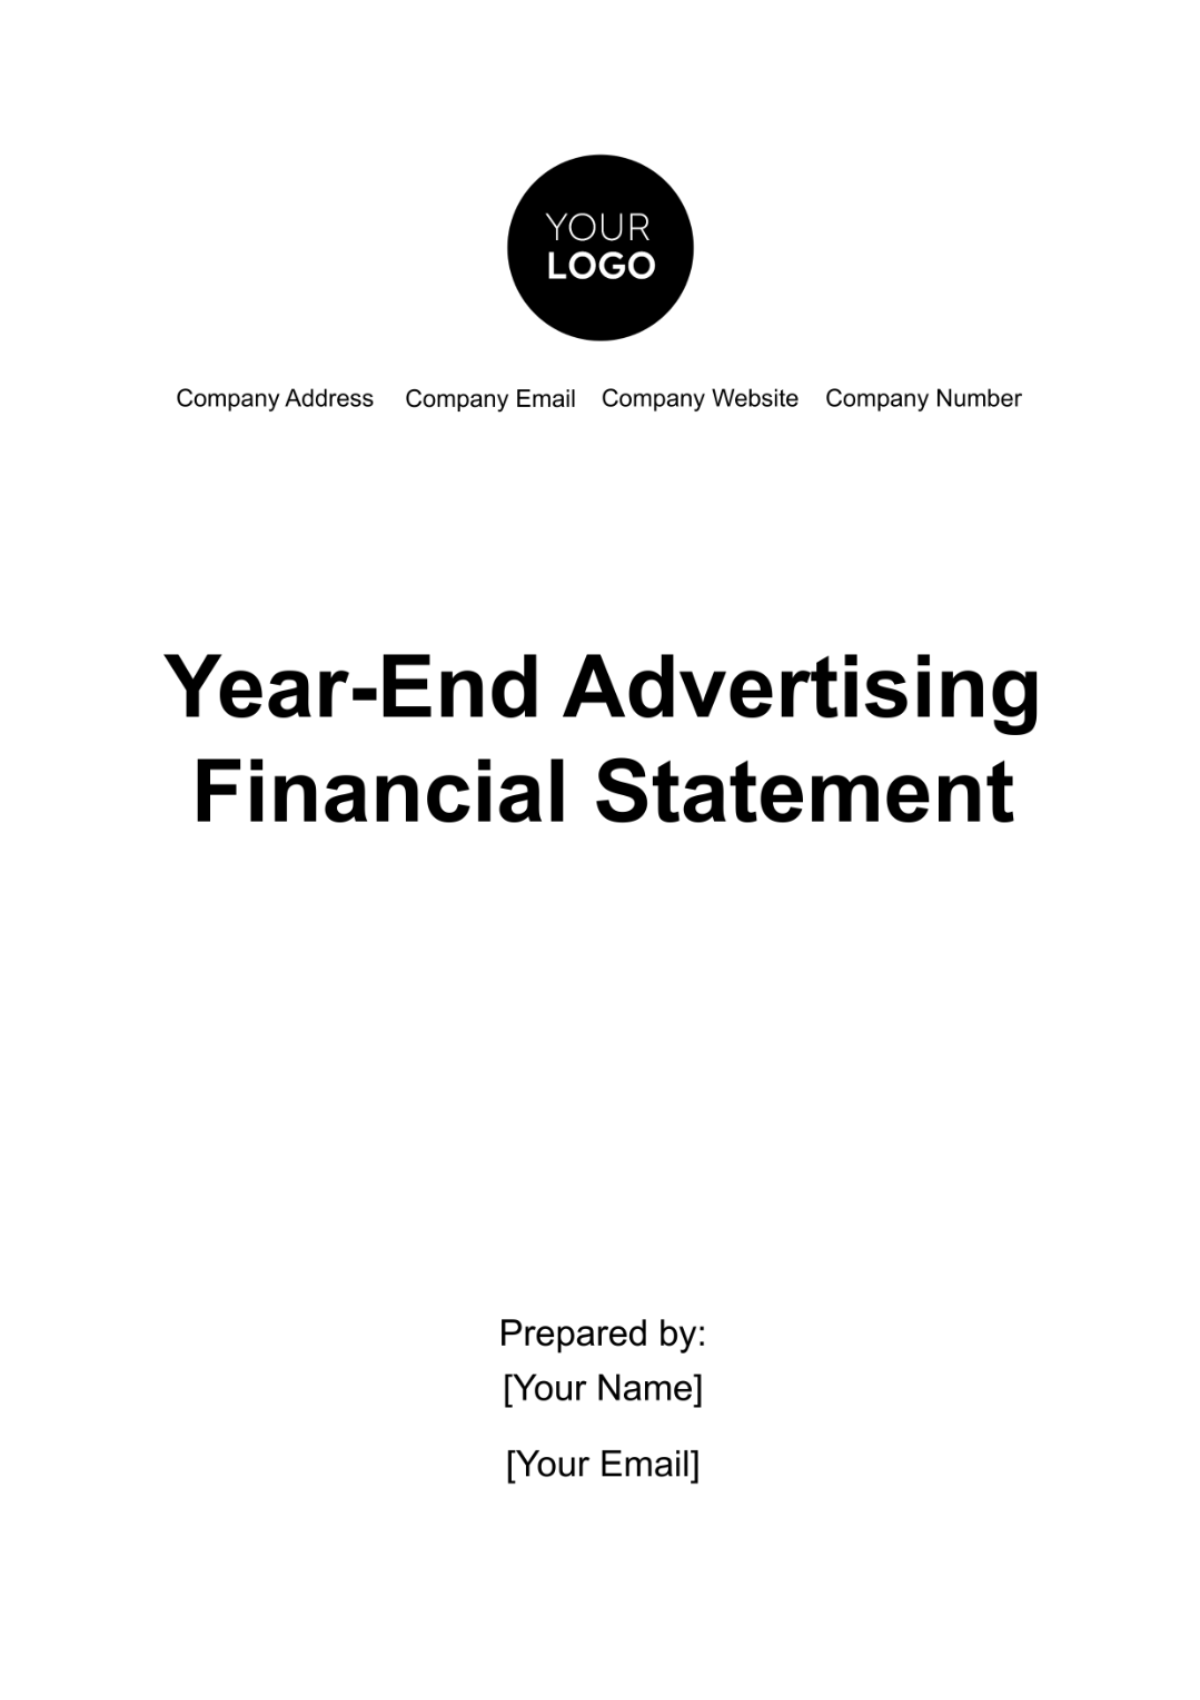 Free Year-End Advertising Financial Statement Template